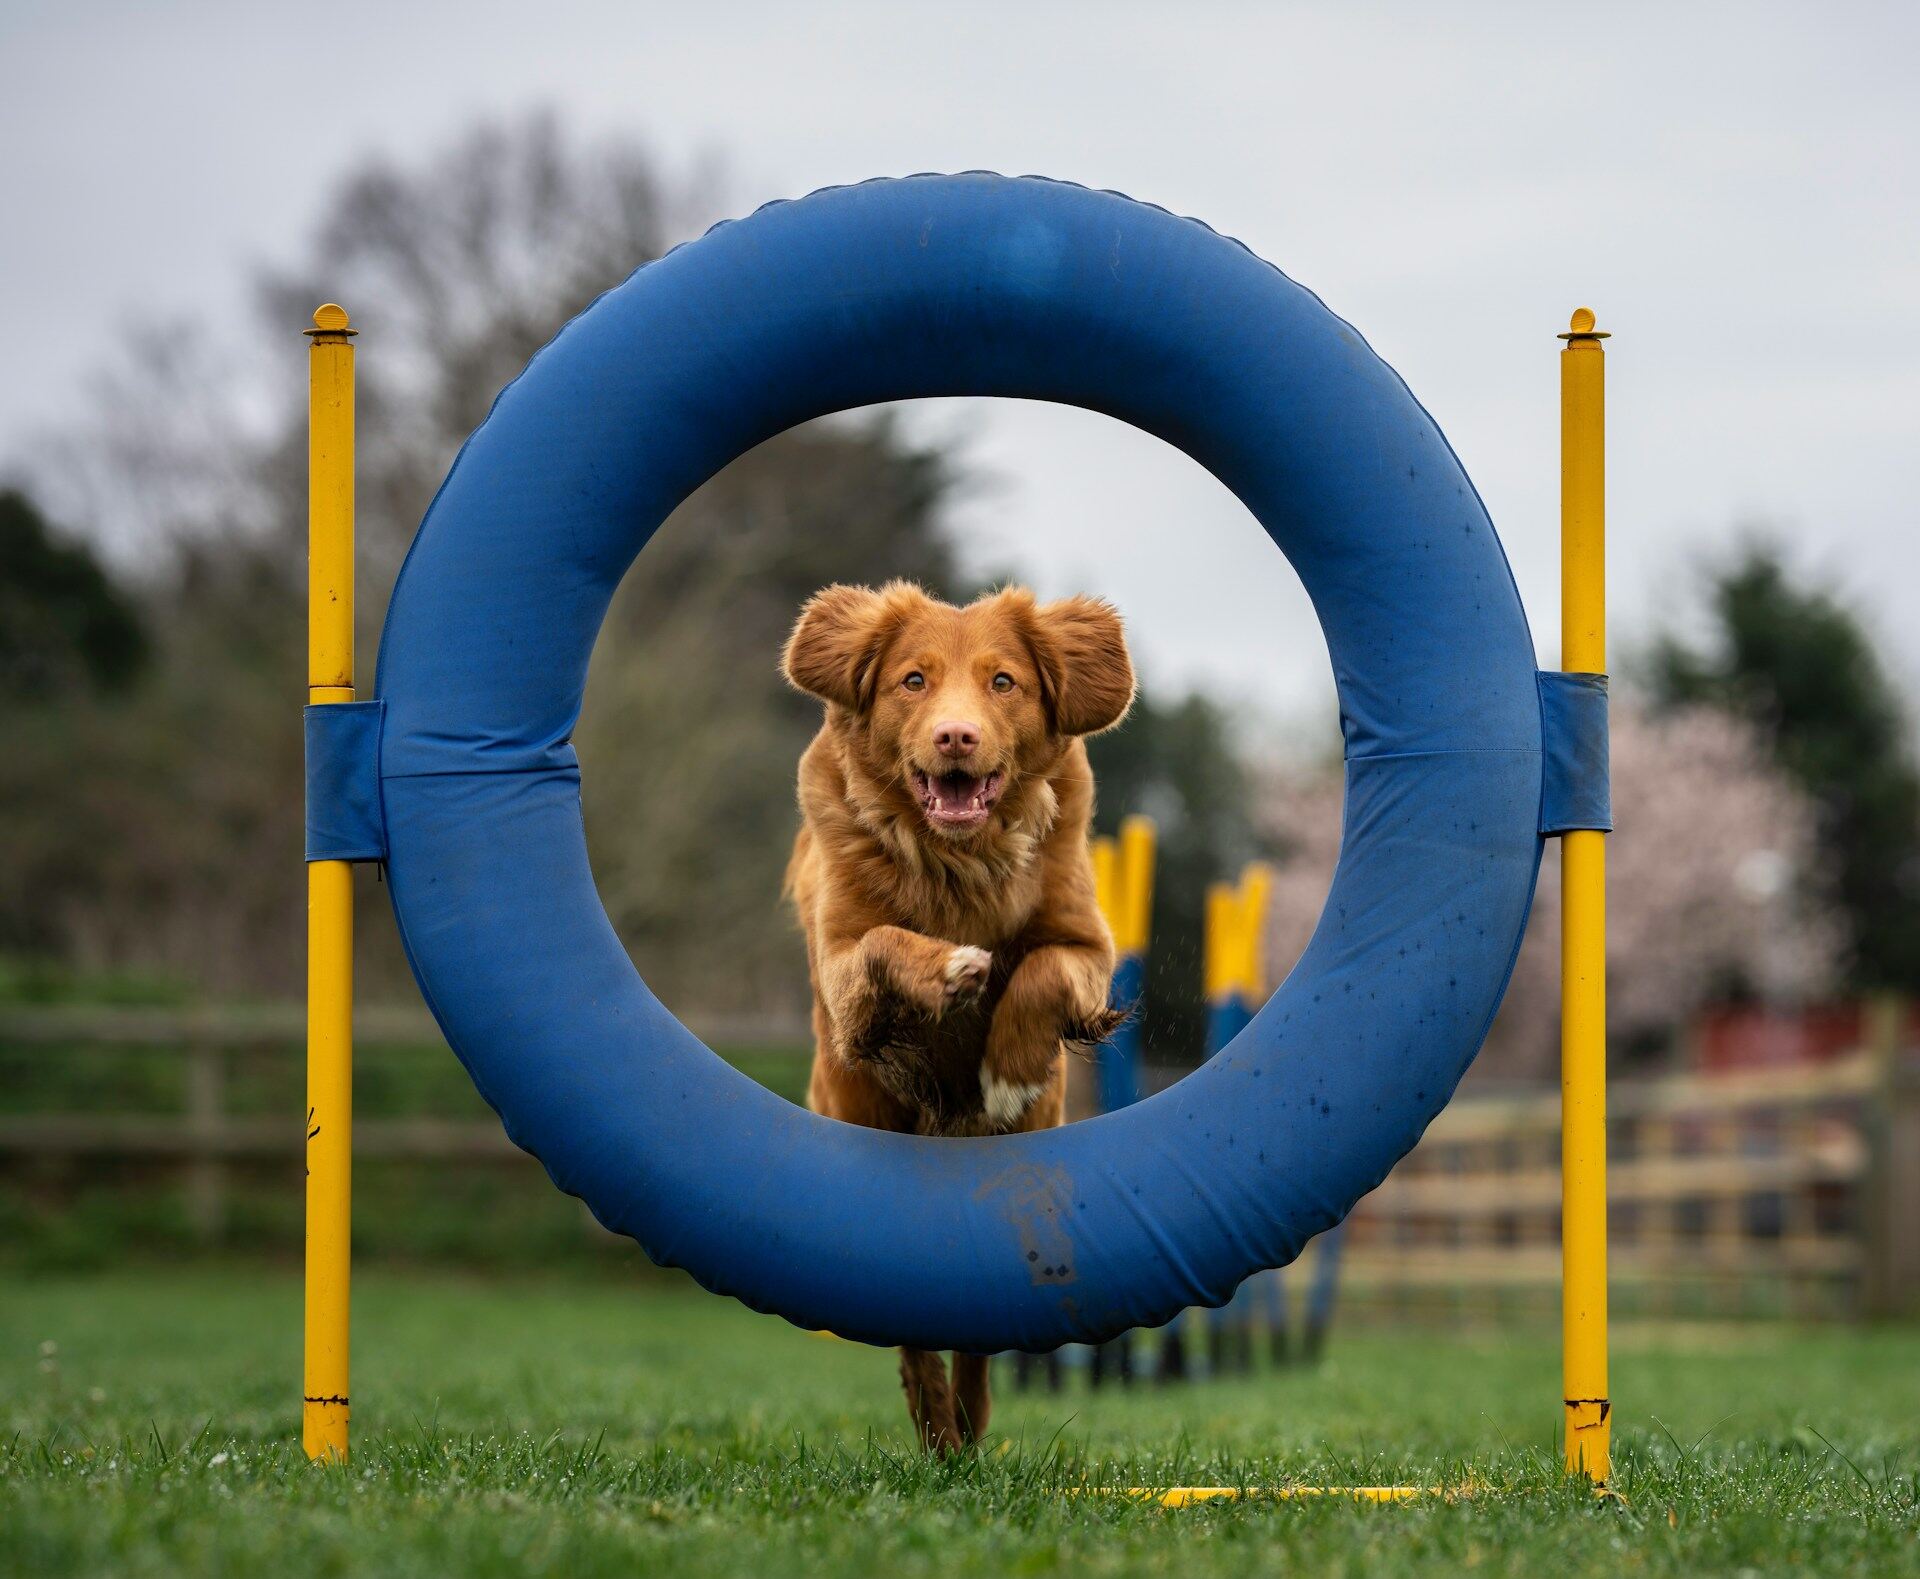 A dog jumping through a blue hoop at an agility training session